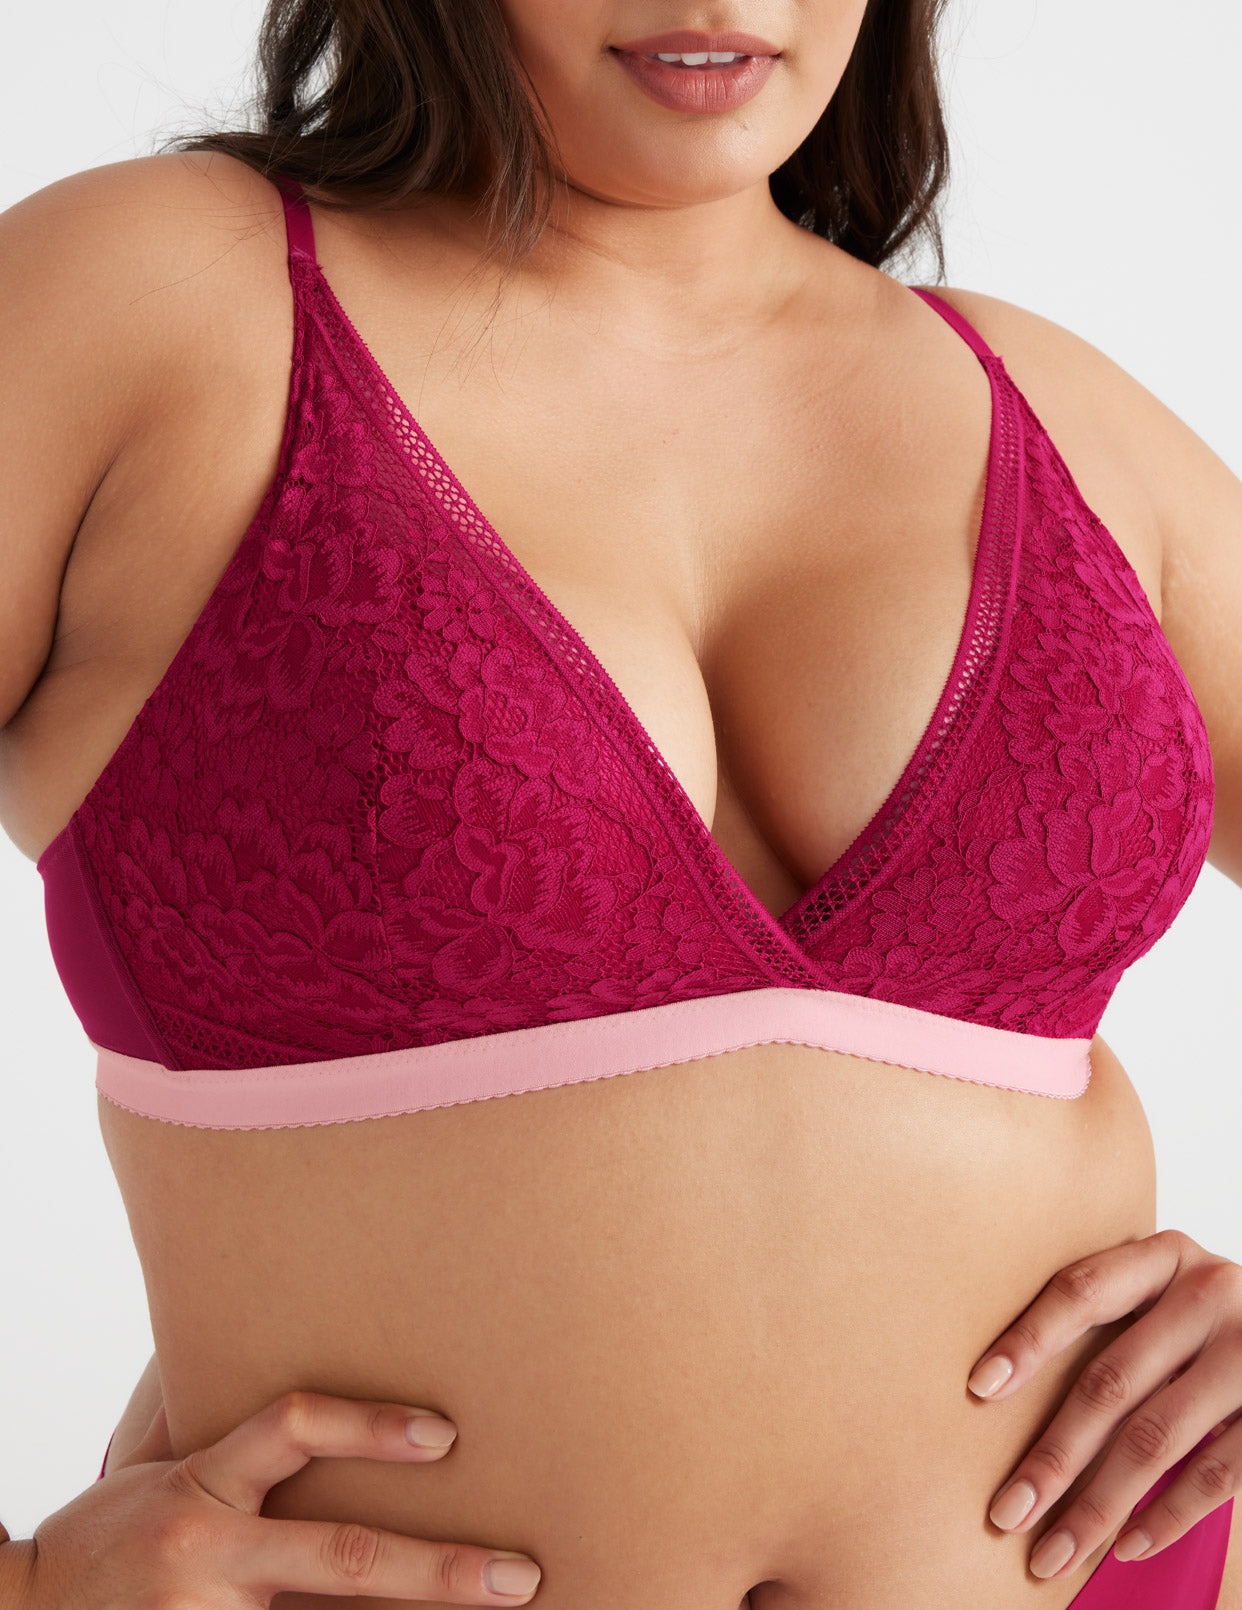 How Should A Bra Fit? A Handy Guide For Finding Your Perfect Bra